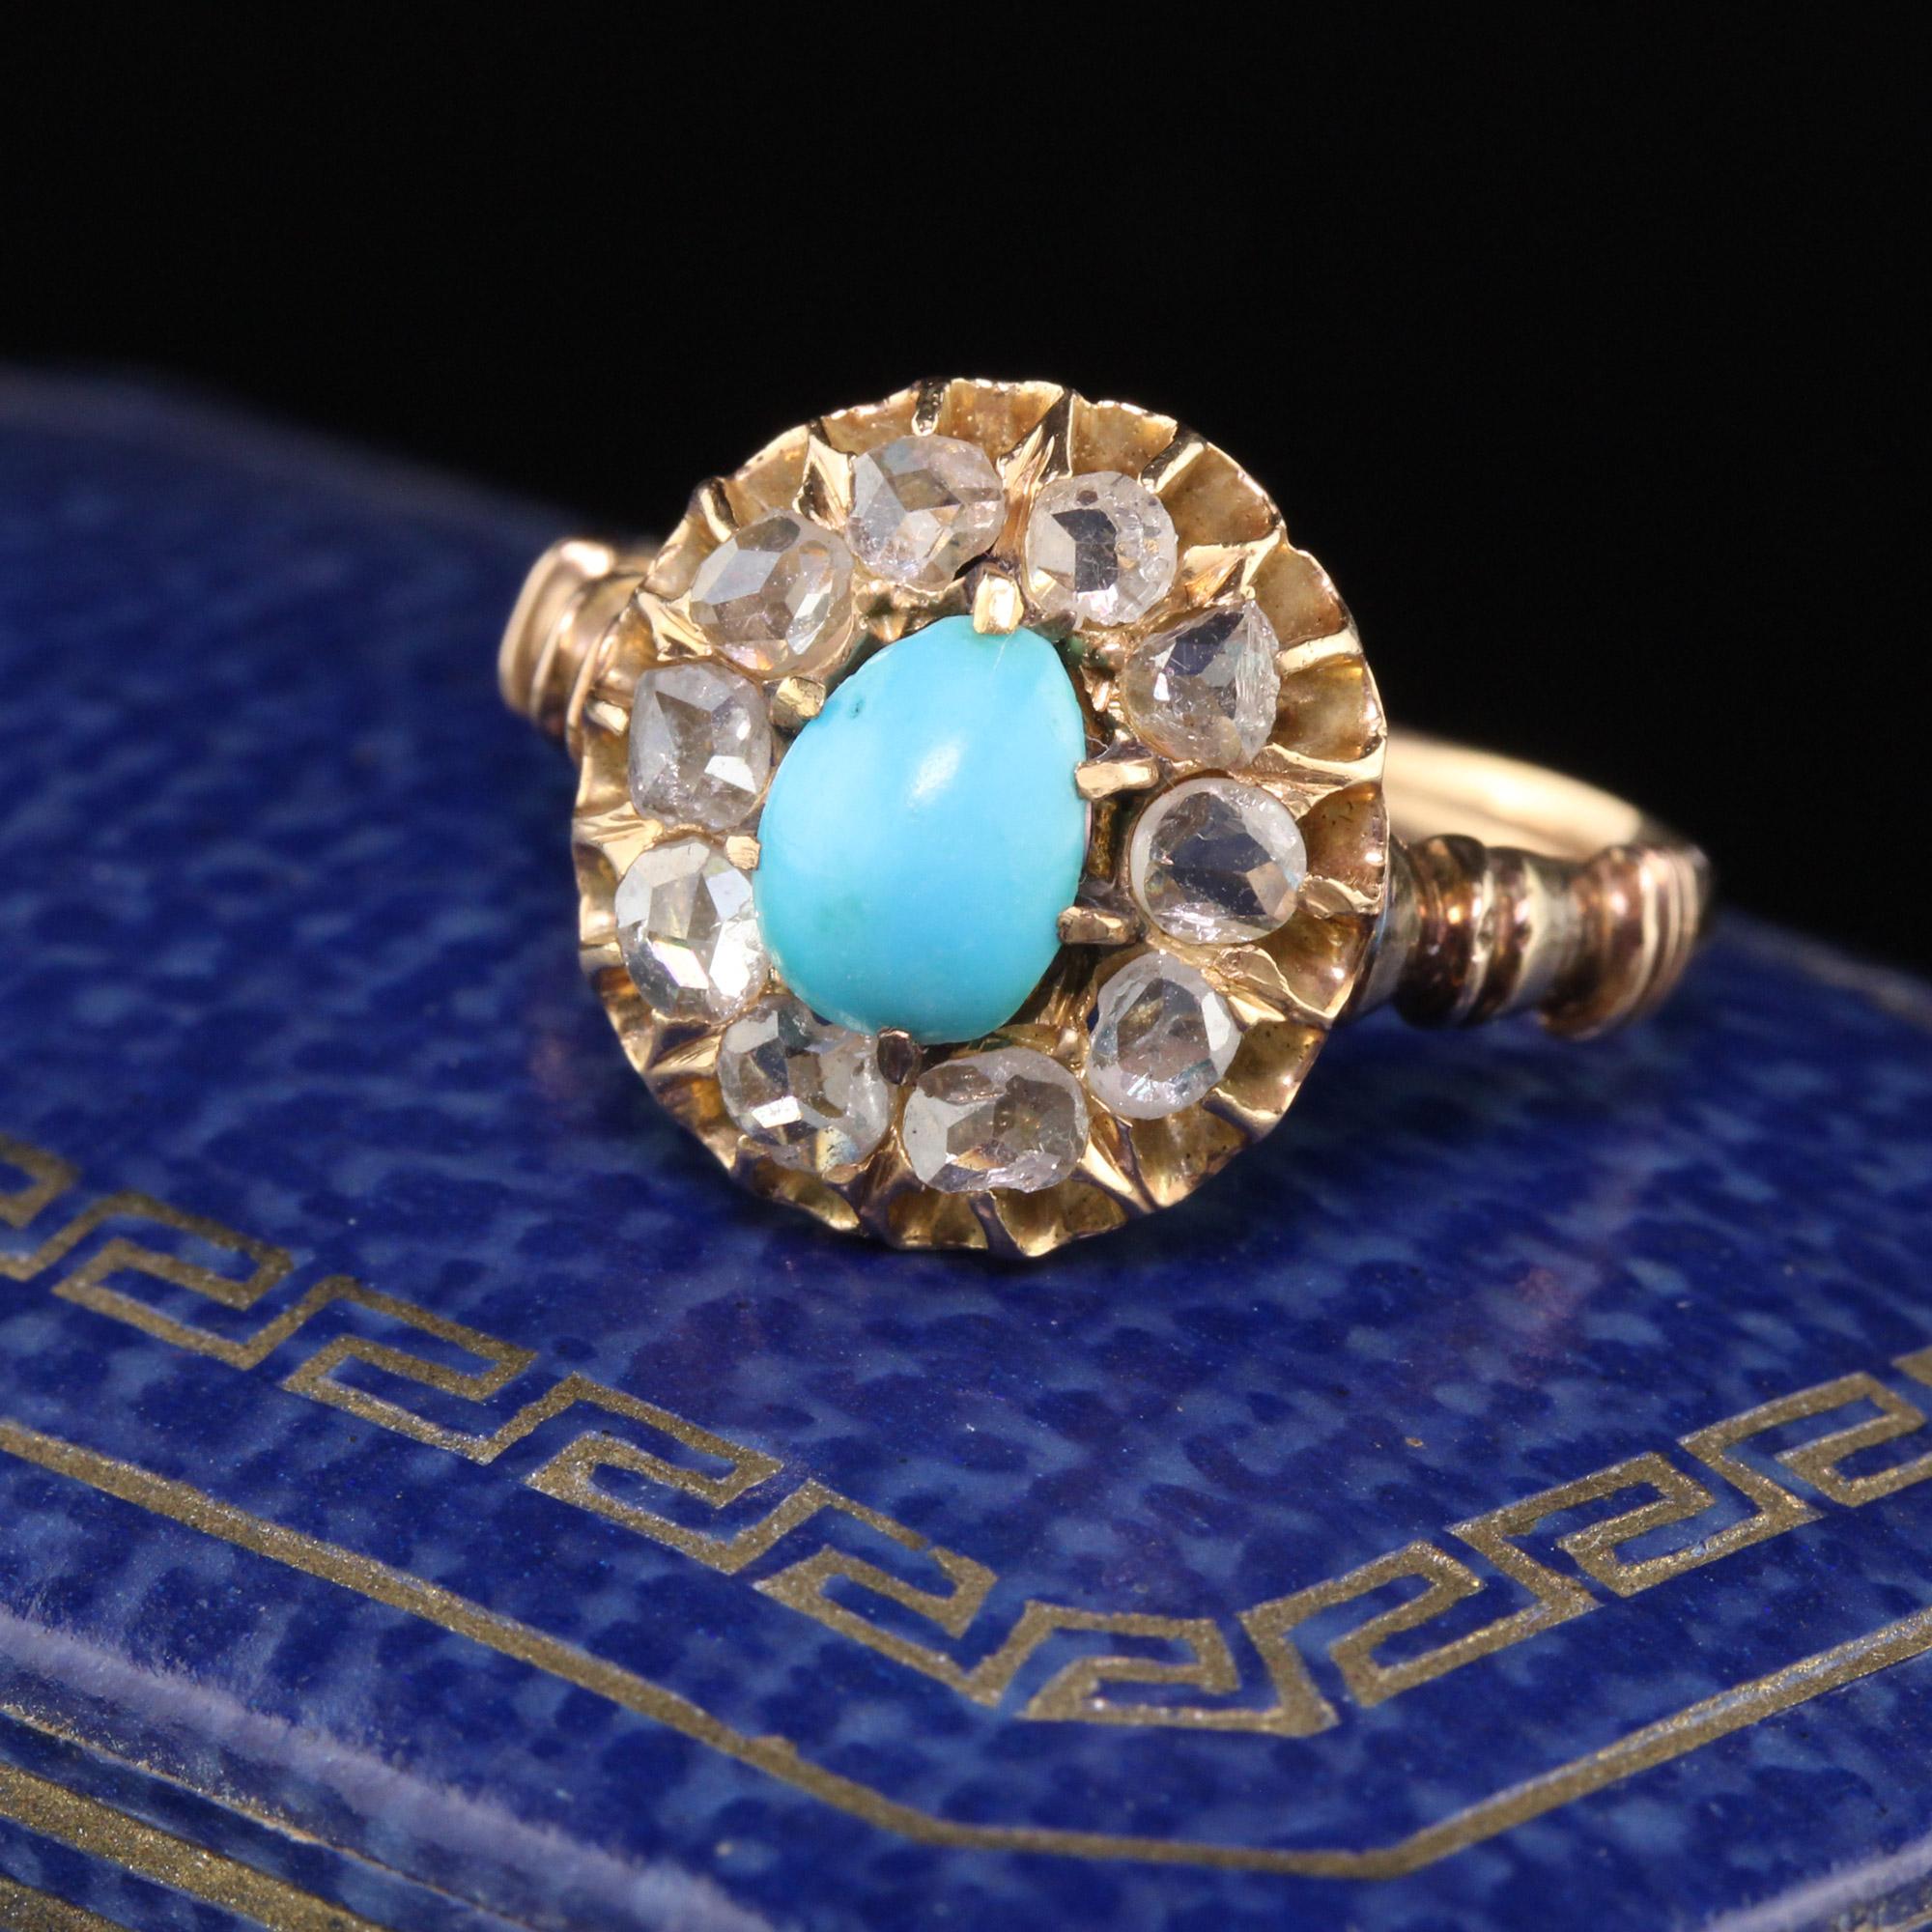 Stunning Victorian Turquoise cluster ring with a halo of beautiful rose cut diamonds. The center turquoise is egg-shaped which gives it a really unique look. The diamonds have gorgeous sparkle! This ring has a great finger-coverage.

#R0281

Metal: